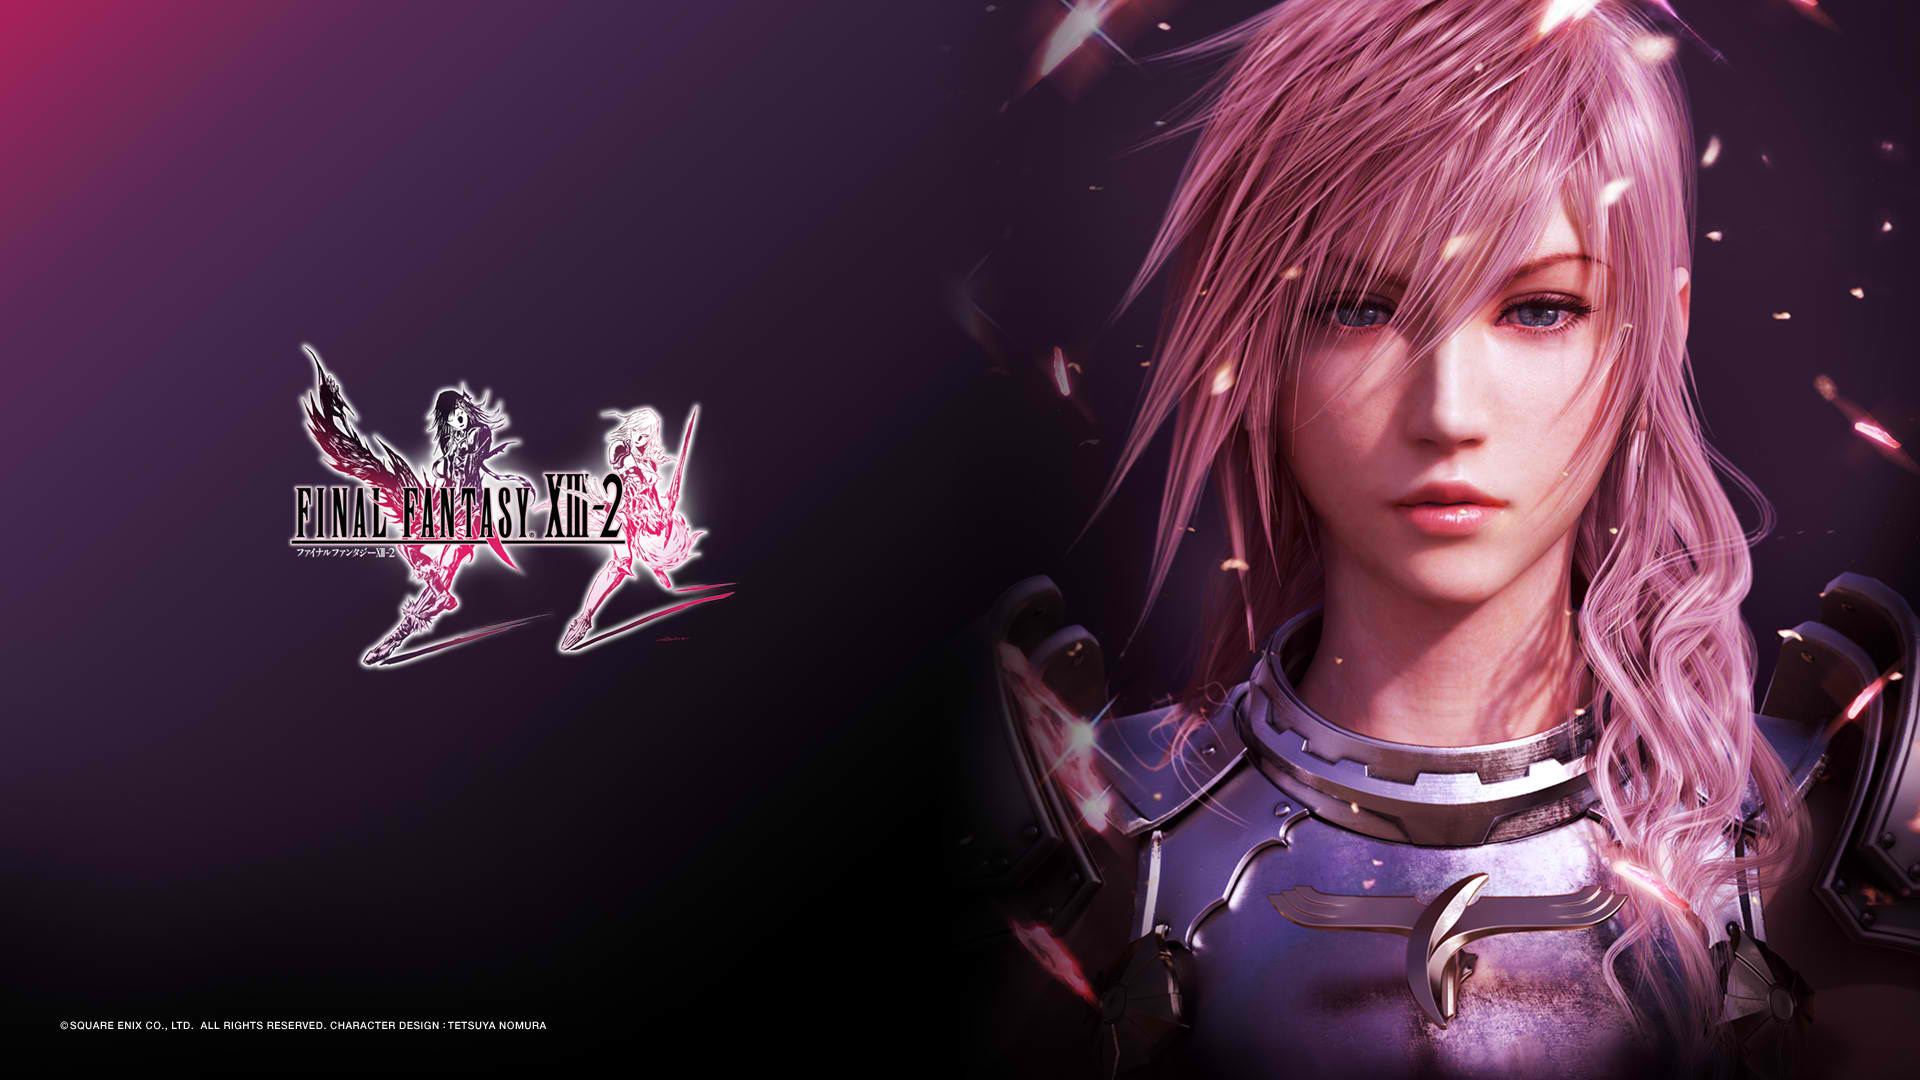 1920x1080 Search Results for “lightning final fantasy 13 wallpaper” – Adorable  Wallpapers